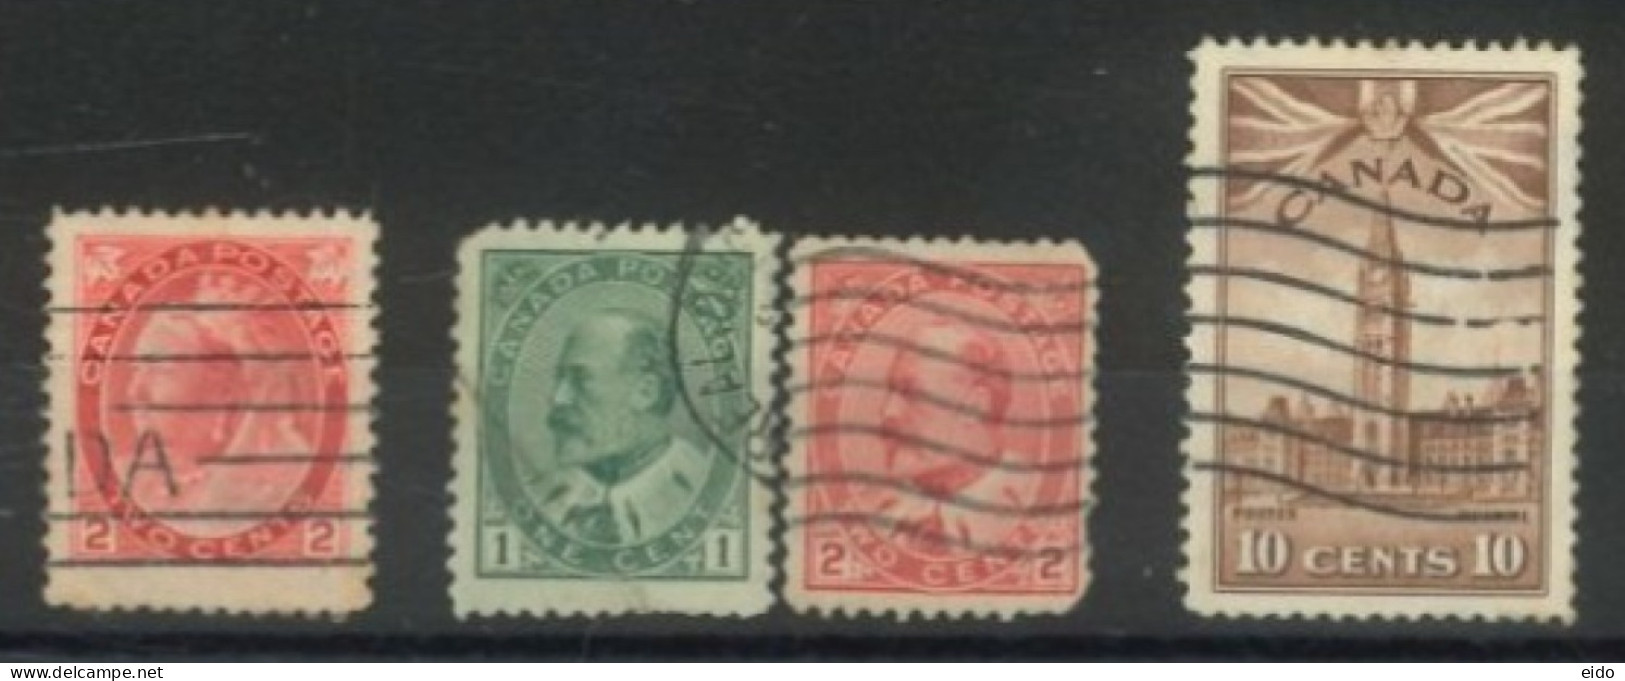 CANADA -  STAMPS SET OF 4, USED. - Oblitérés